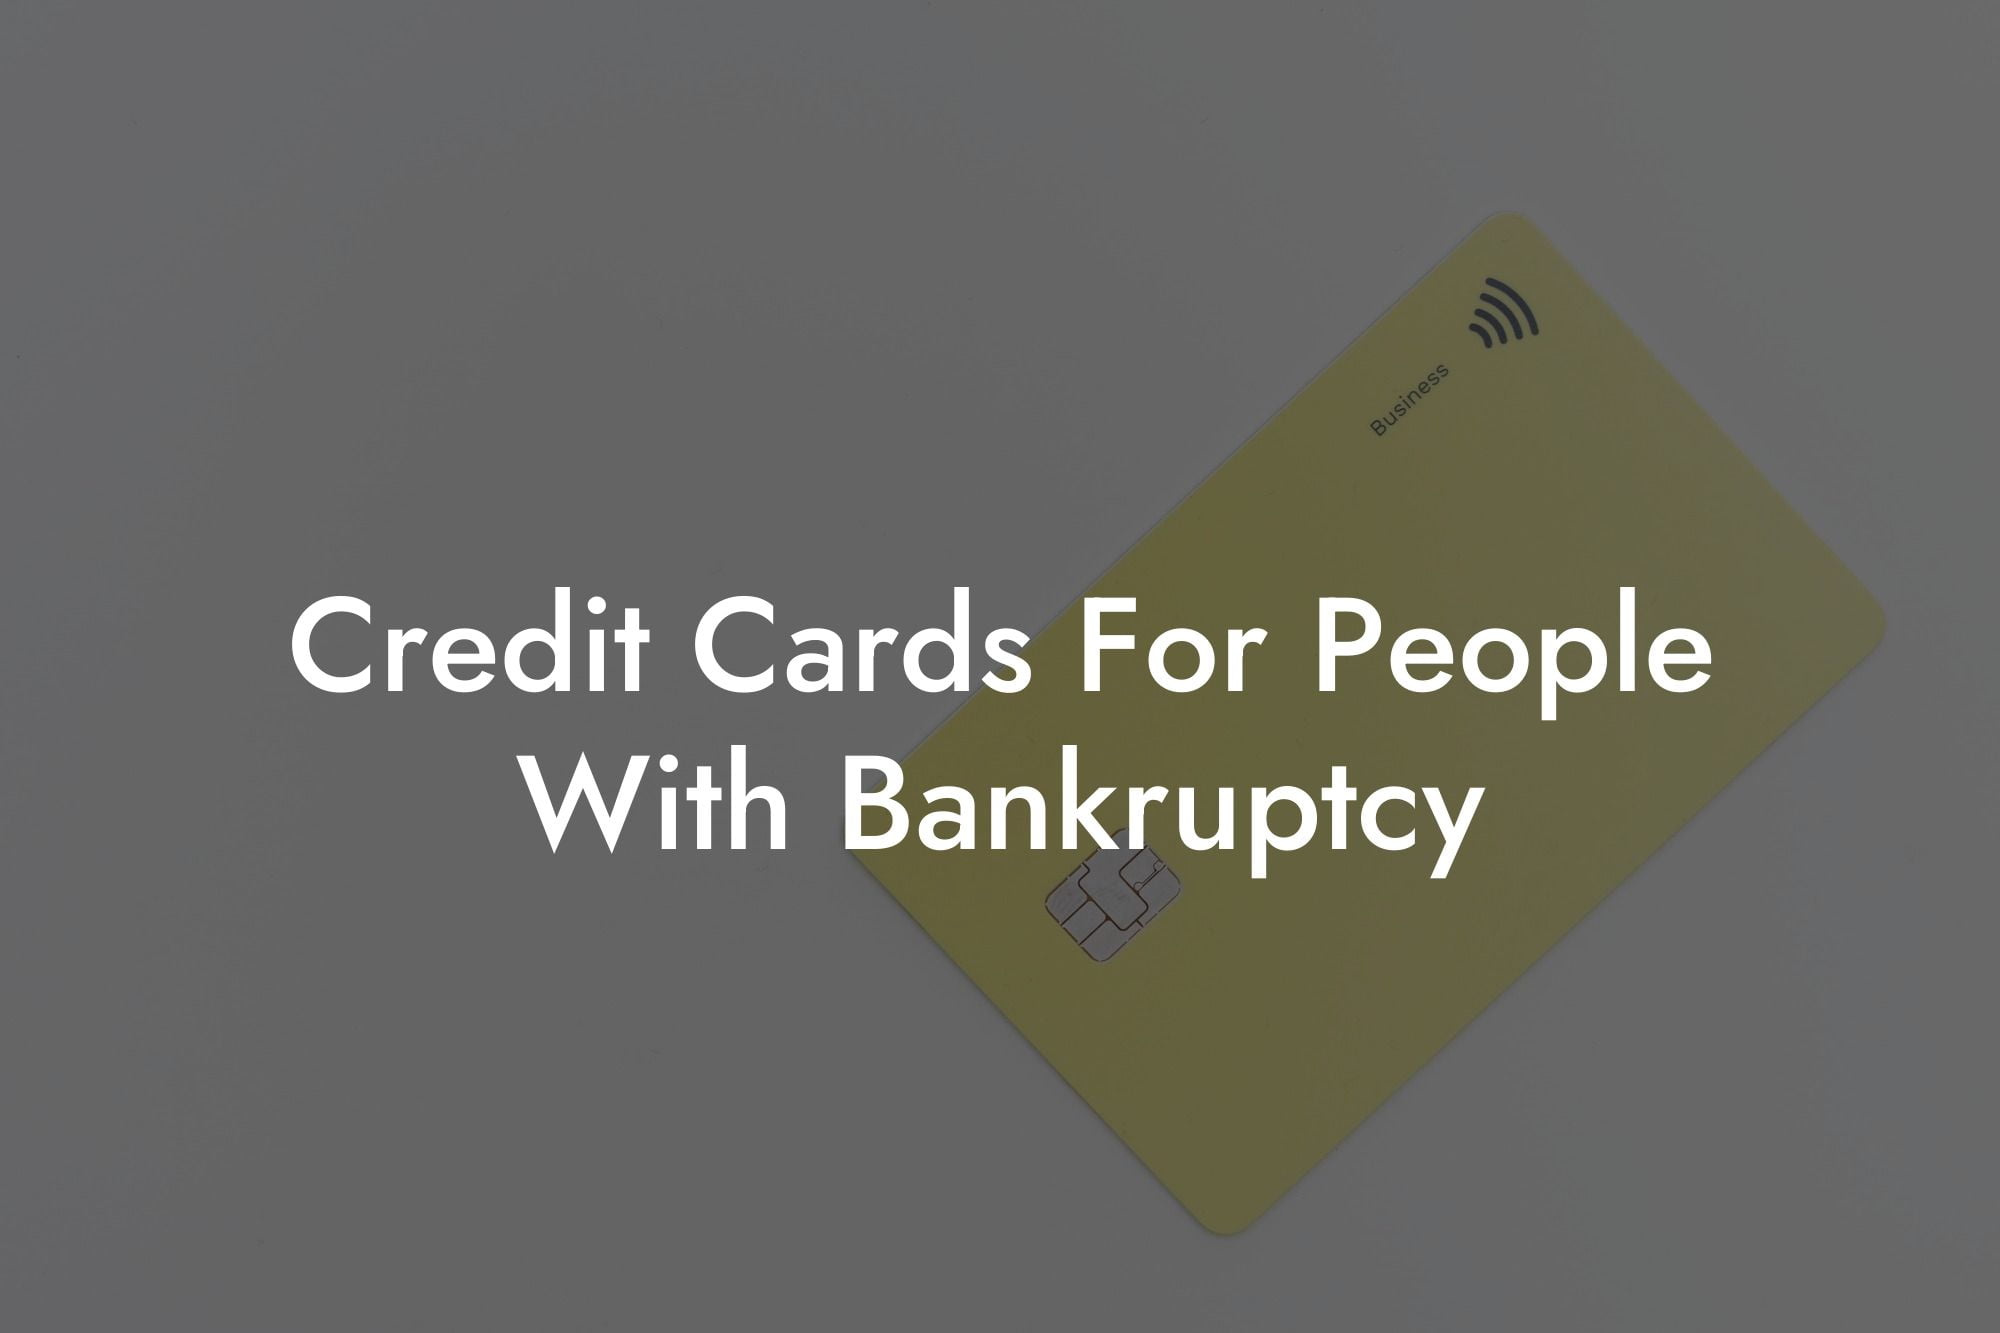 Credit Cards For People With Bankruptcy